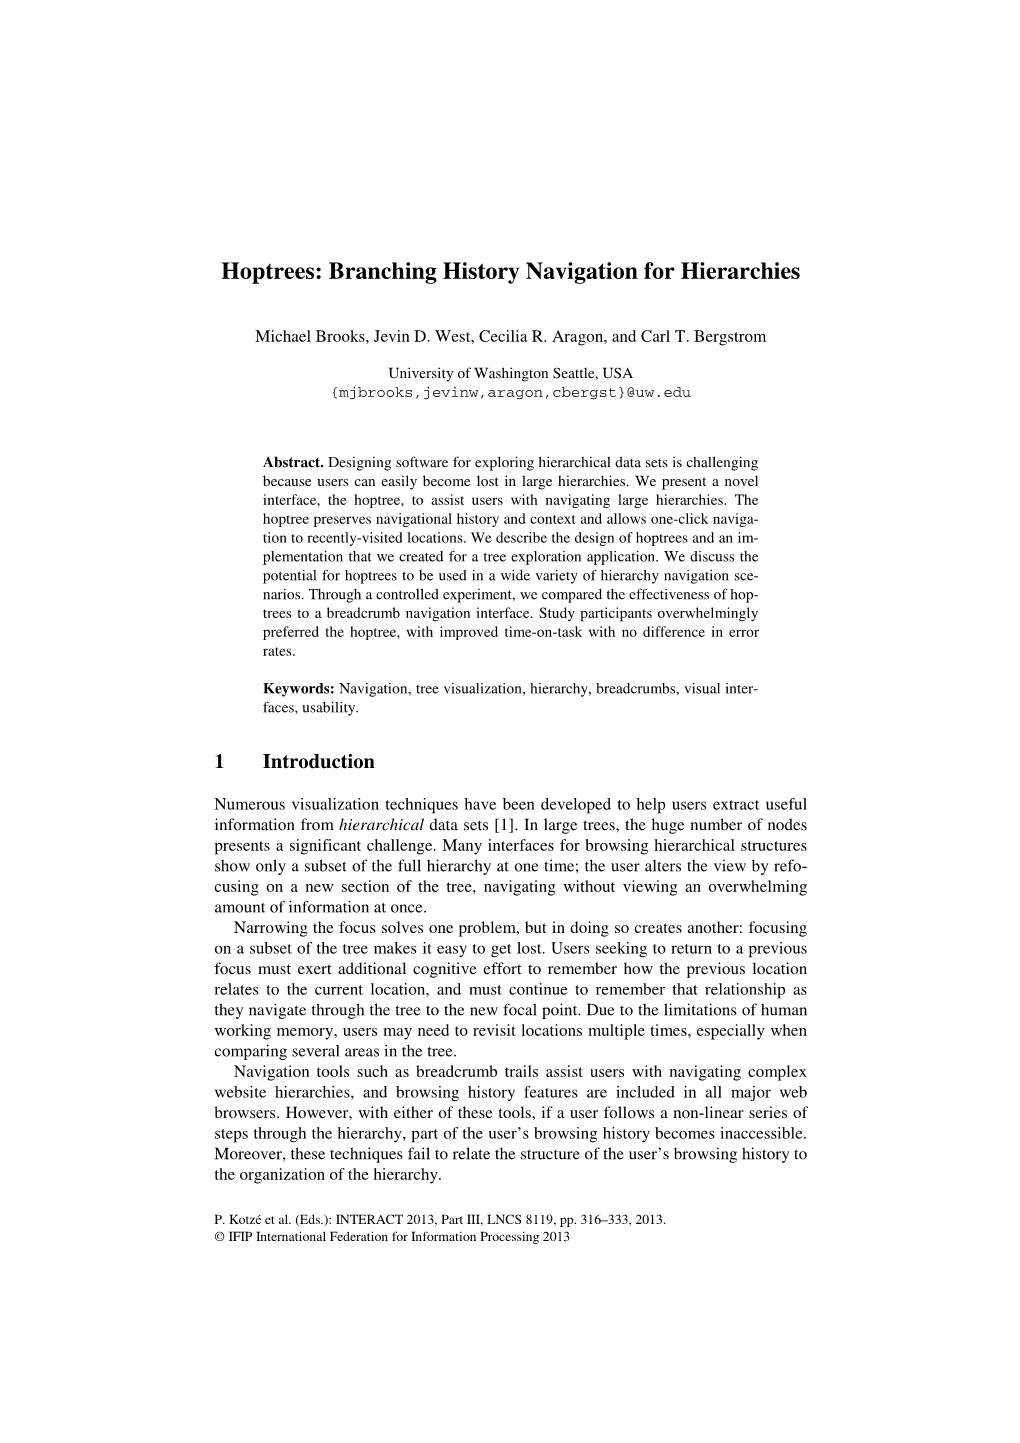 Hoptrees: Branching History Navigation for Hierarchies